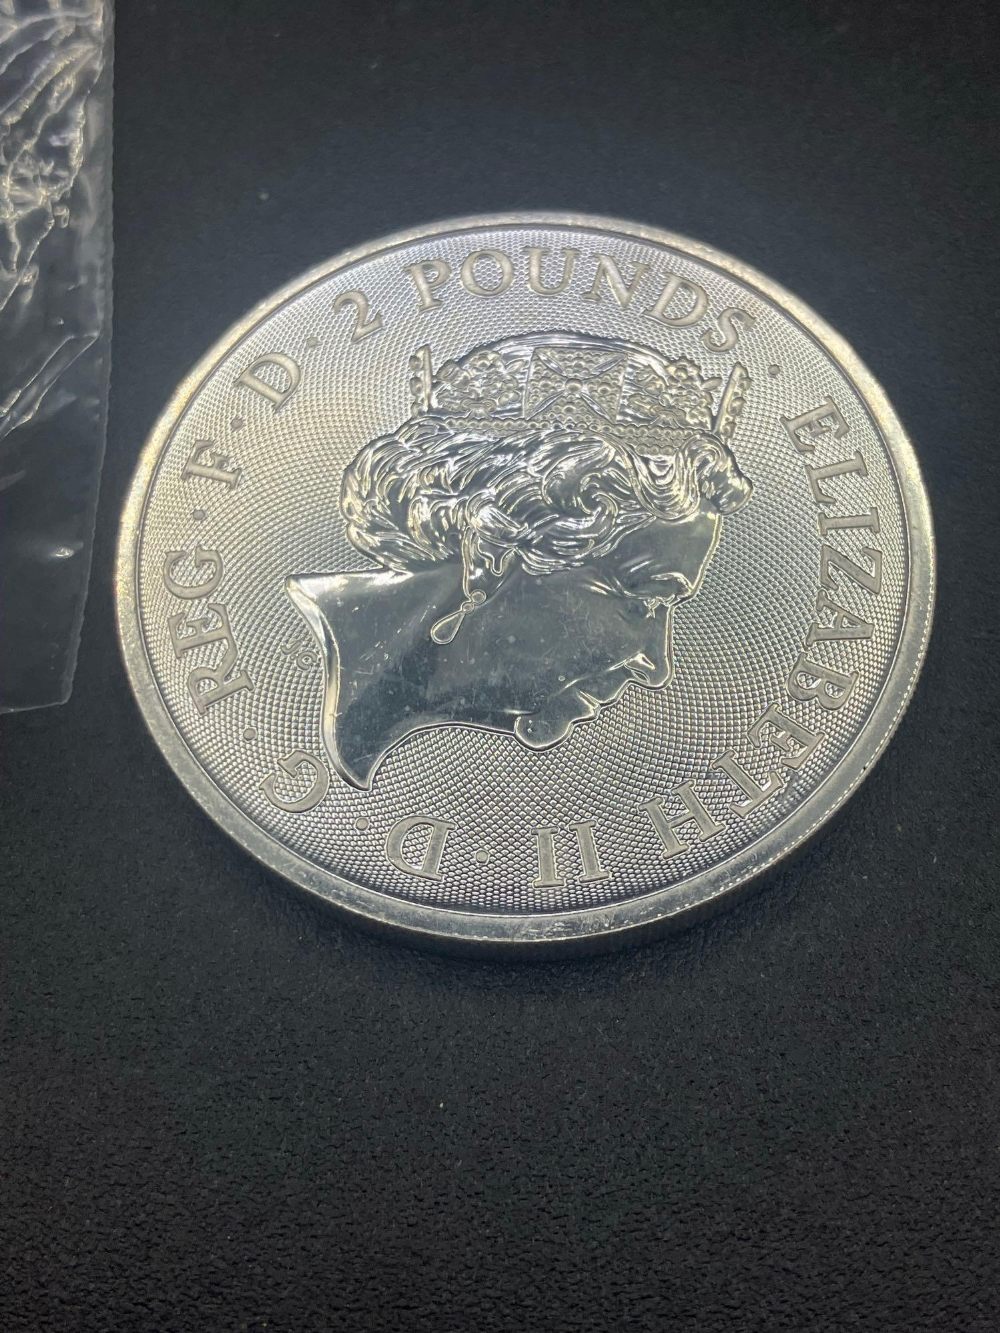 2018 Year of the Dog Silver Coin 1oz Royal Mint Lunar Series - Image 2 of 2